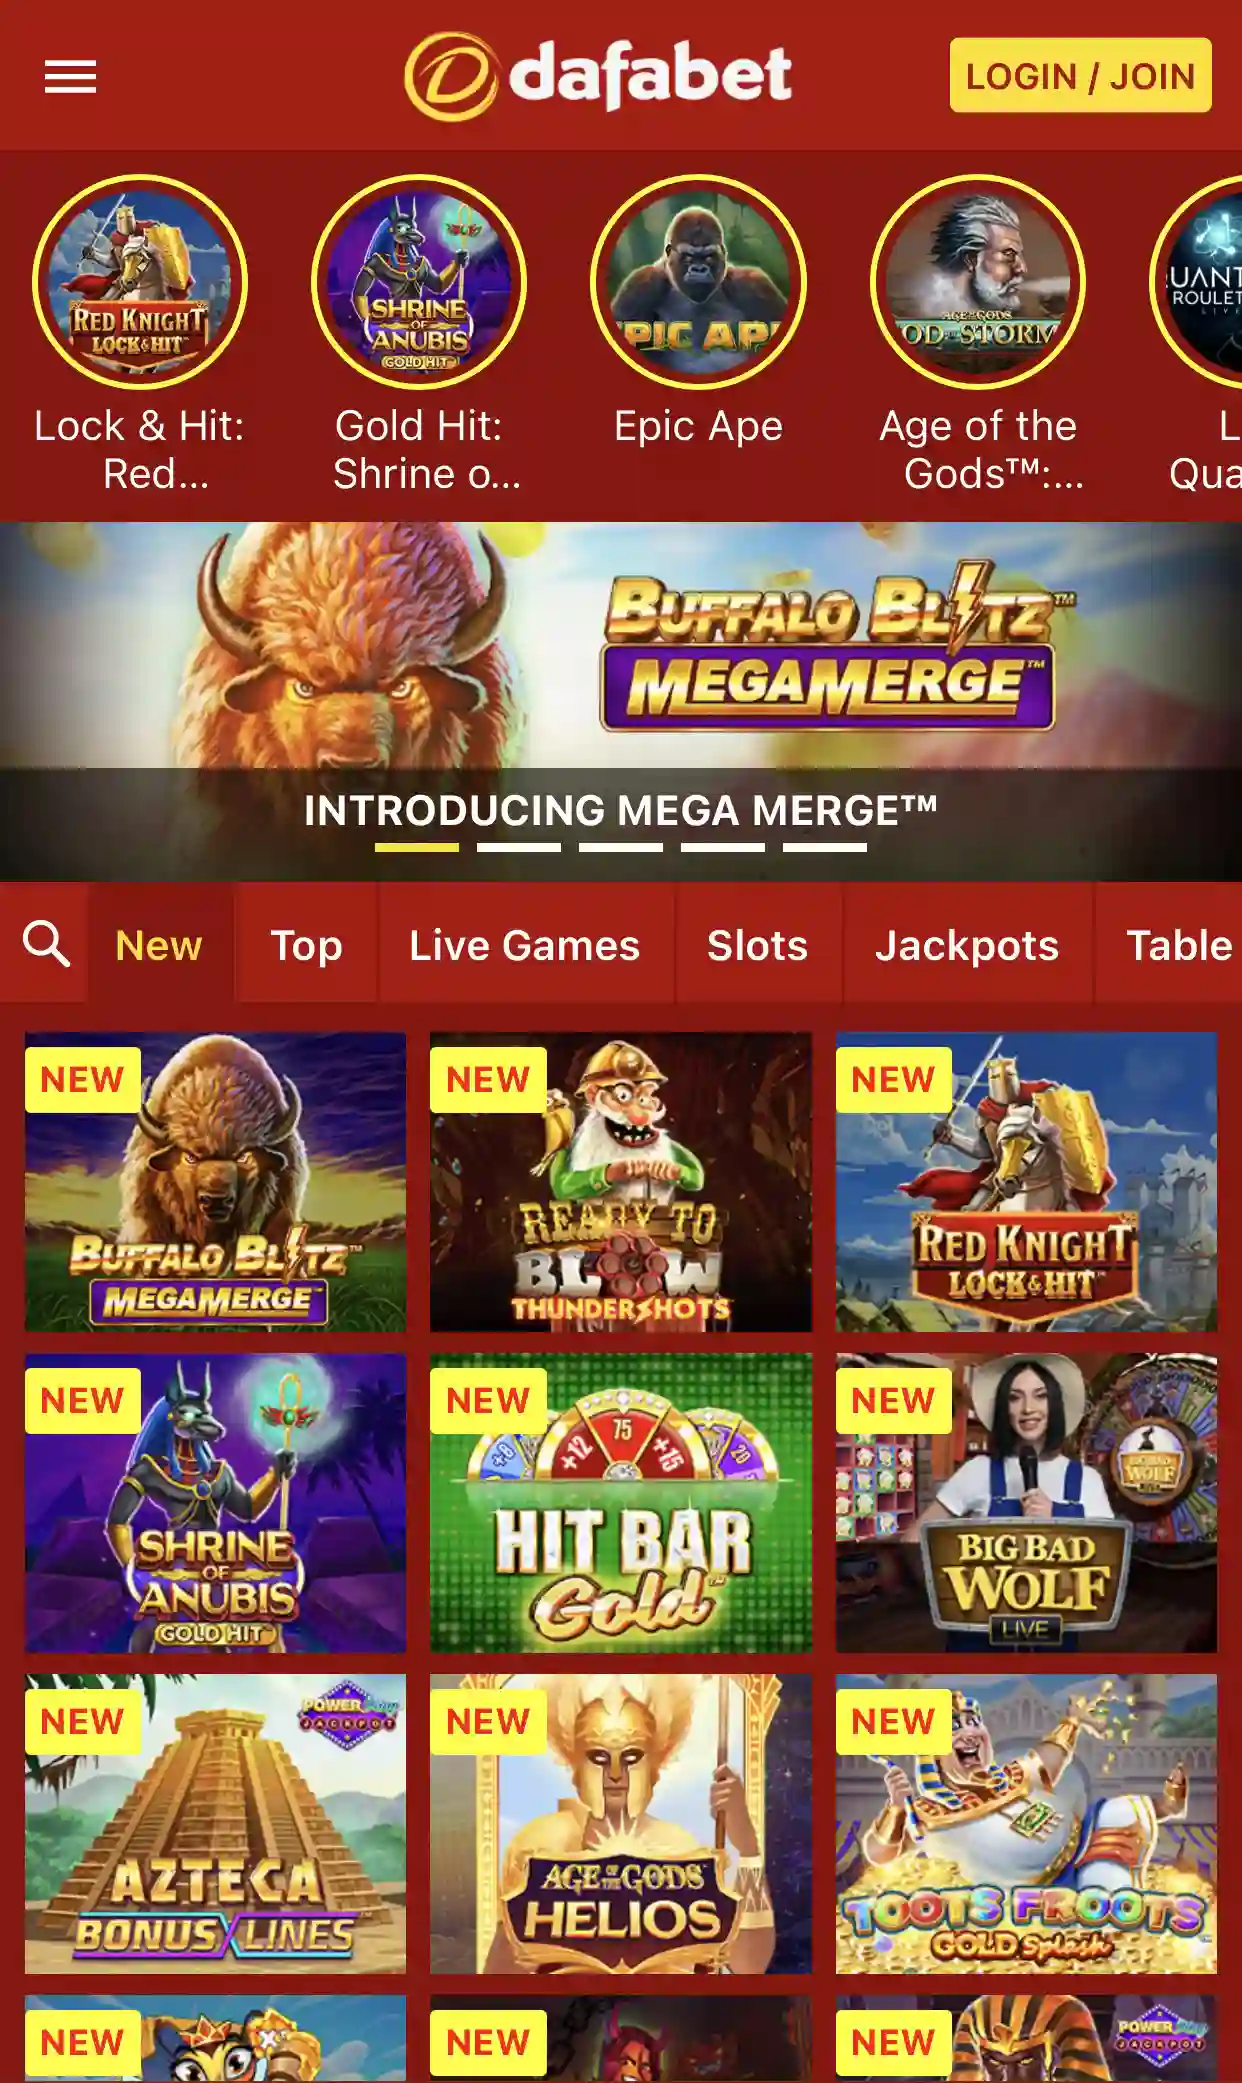 Visit the casino section of the Dafabet website and play the newest games online.